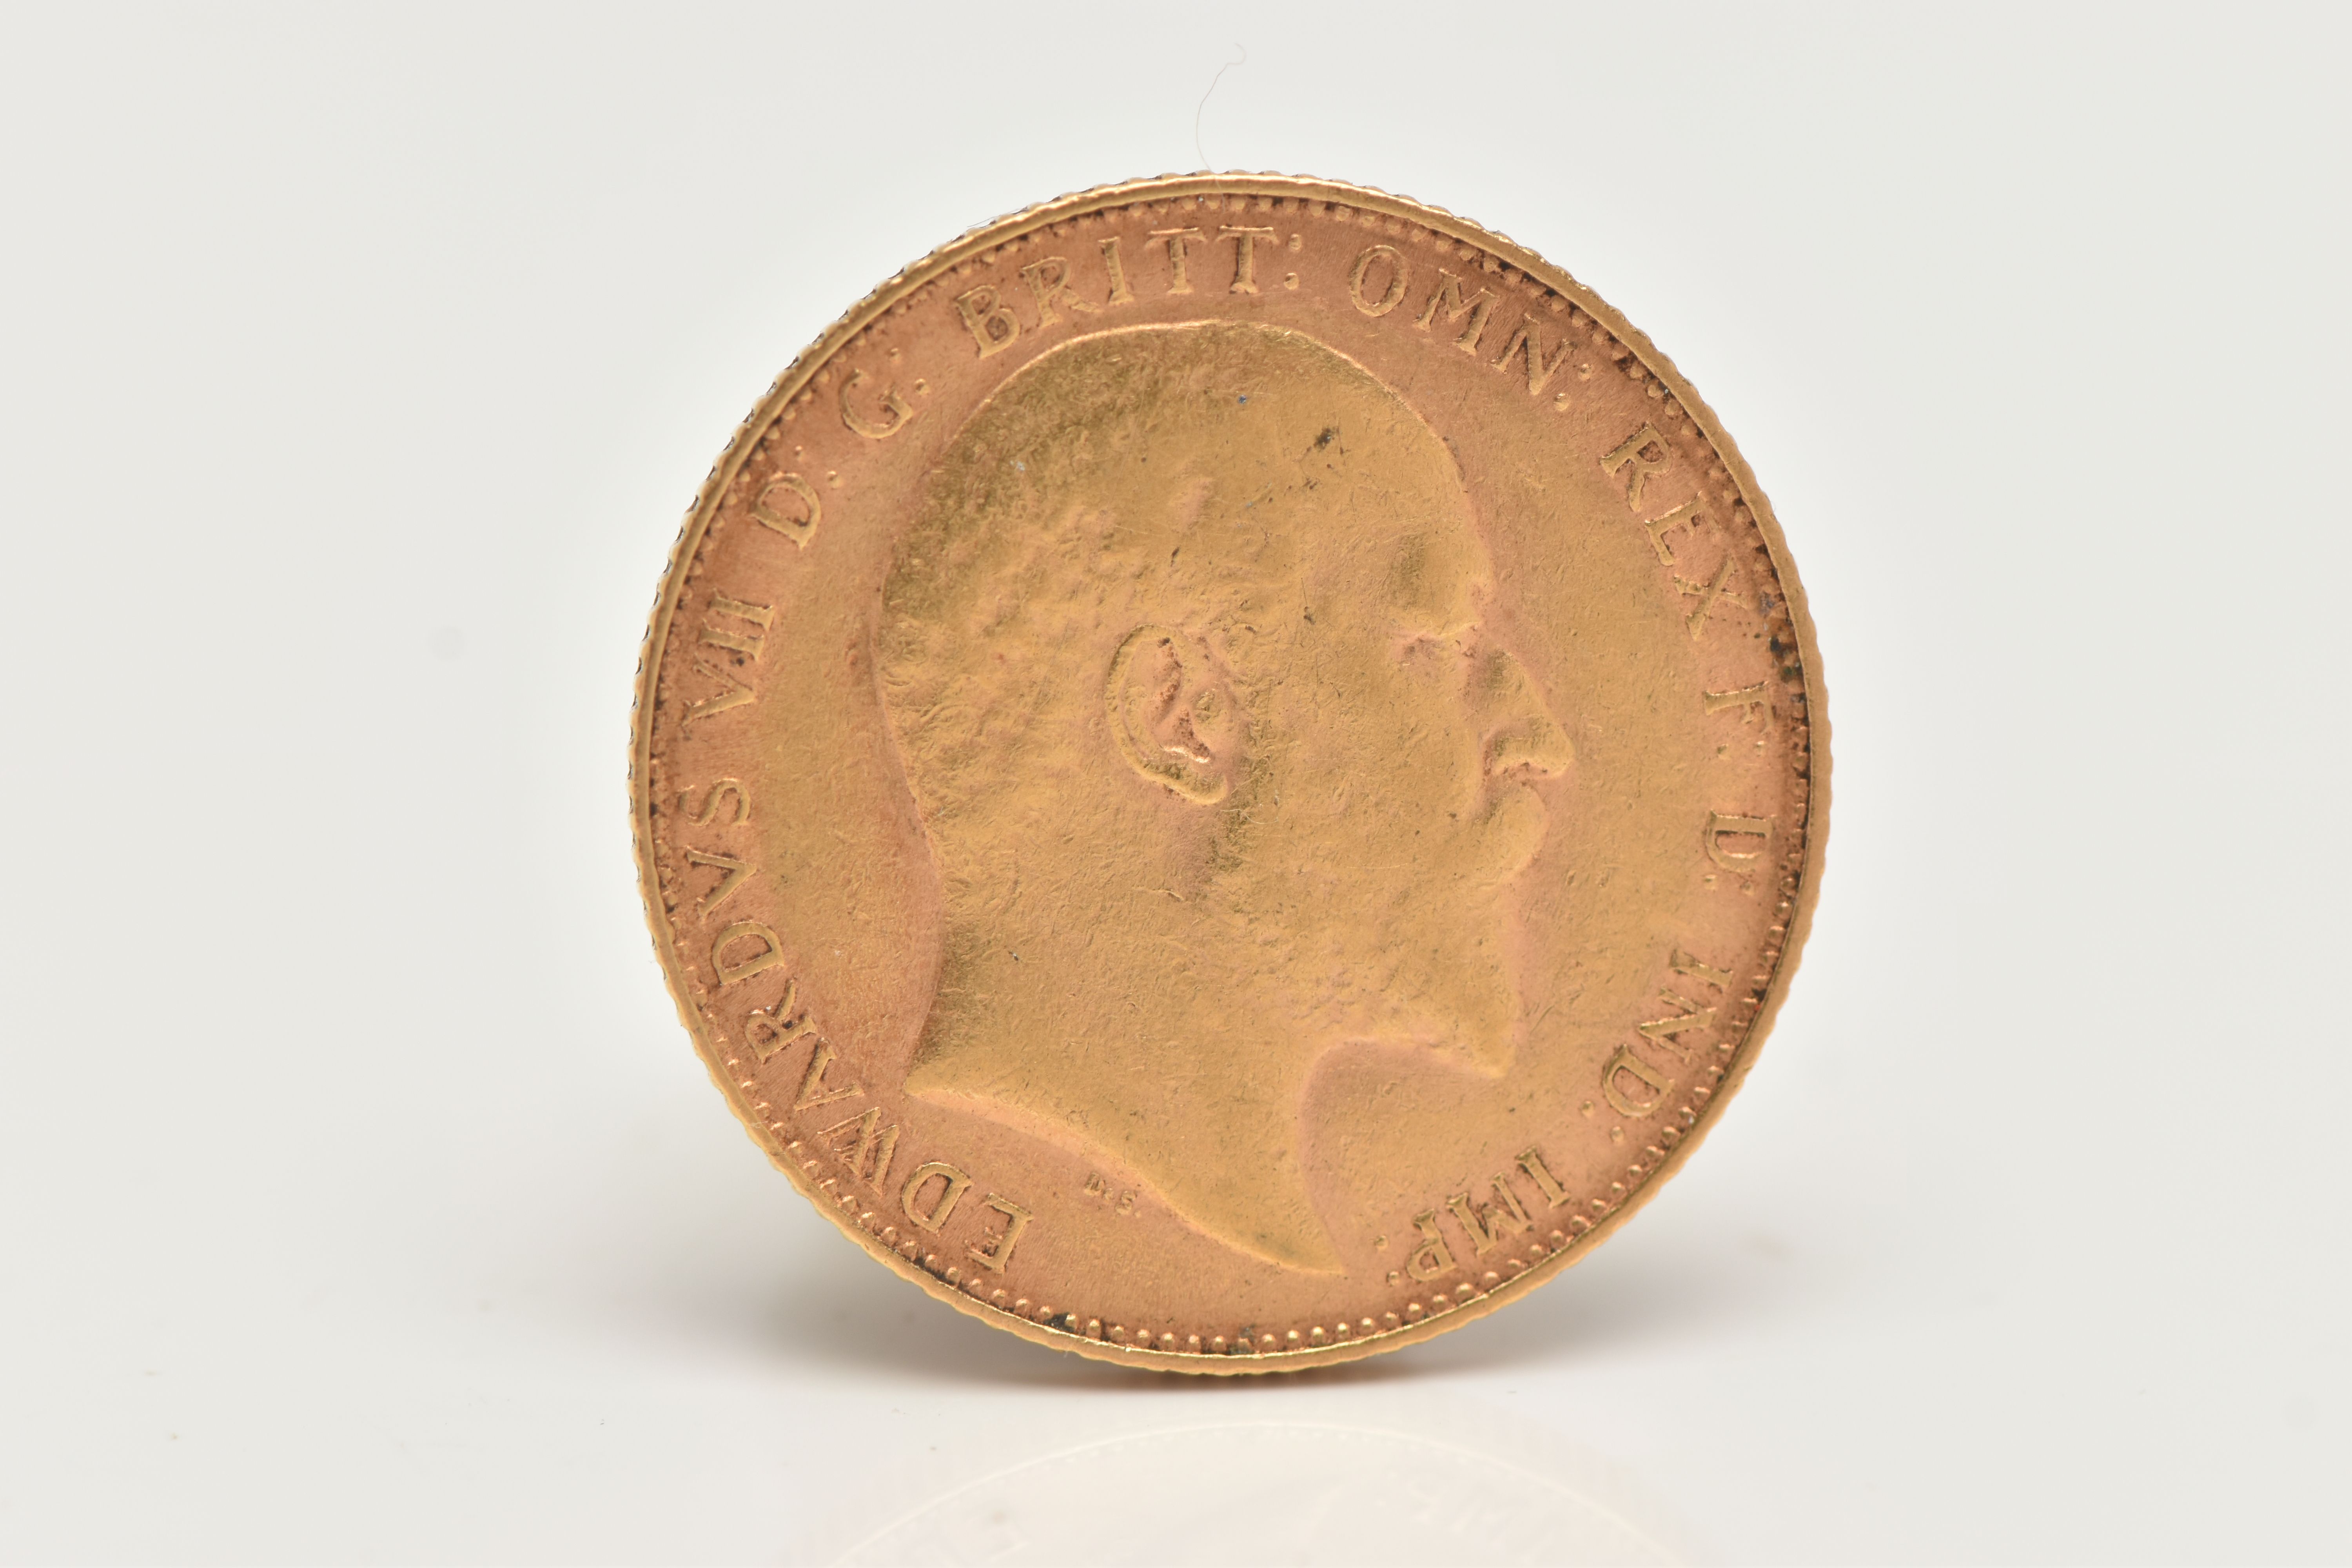 AN EDWARDIAN FULL SOVEREIGN GOLD COIN, obverse depicting Edward VII, reverse George and the Dragon - Image 2 of 2